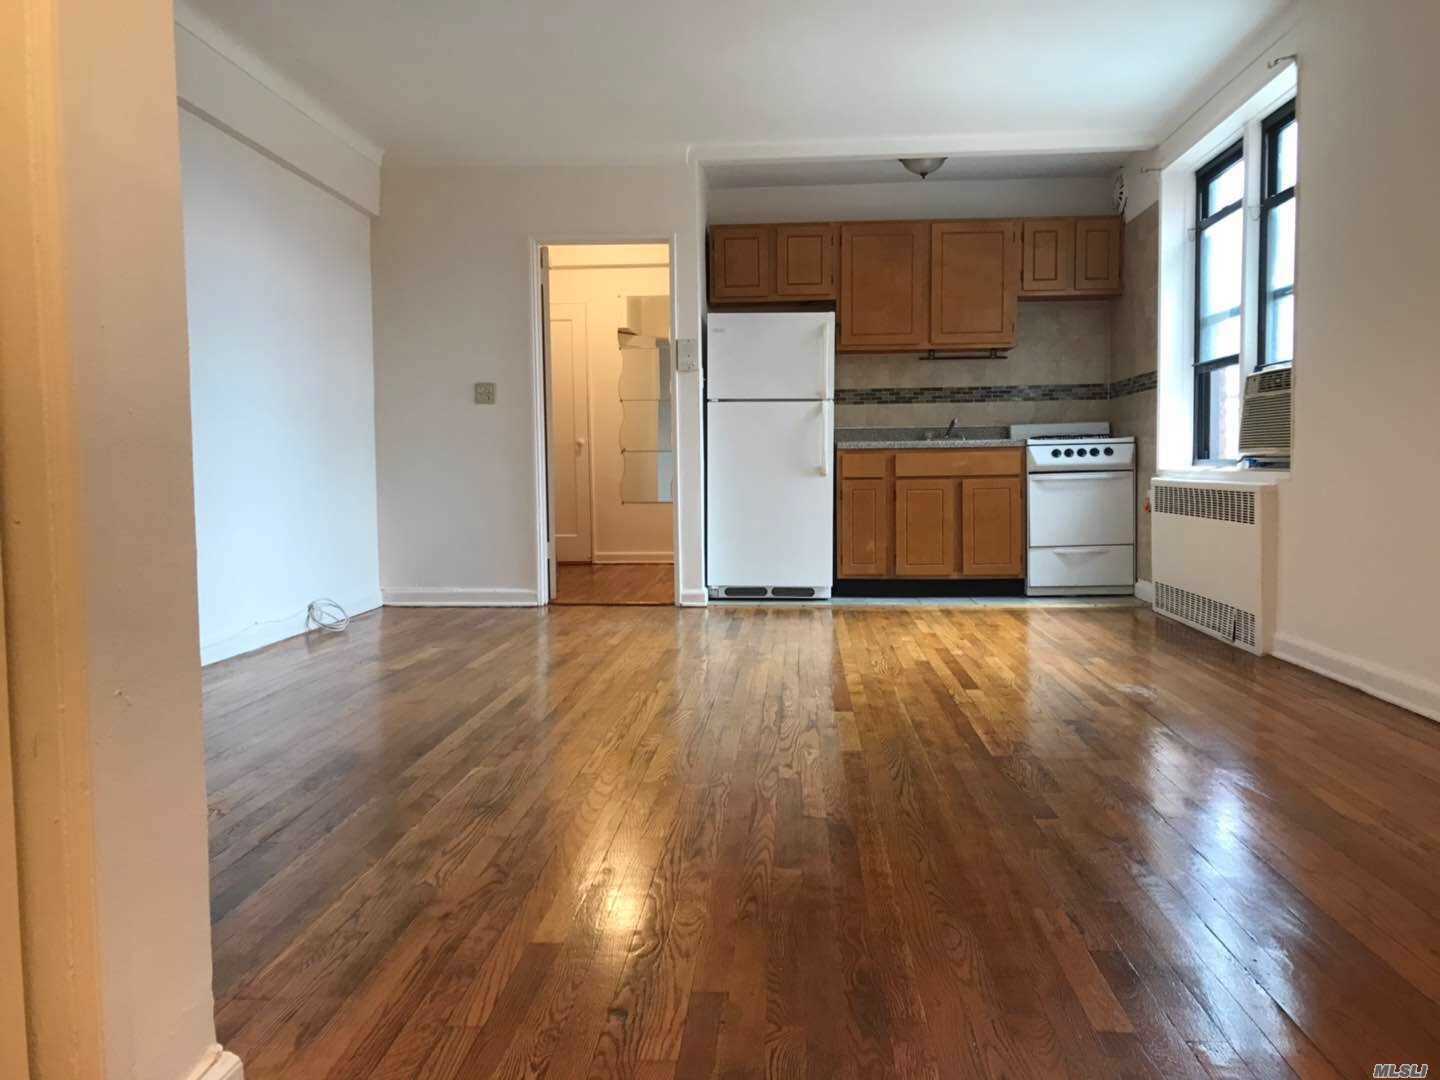 very nice studio co-op in the heart of Flushing. maintenance includes heat & hot water. Washer & dryer inside building. Area is super safe, clean, private, and convenient. It&rsquo;s walking distance to the Main St shopping, Convenient spot close to many top restaurants.